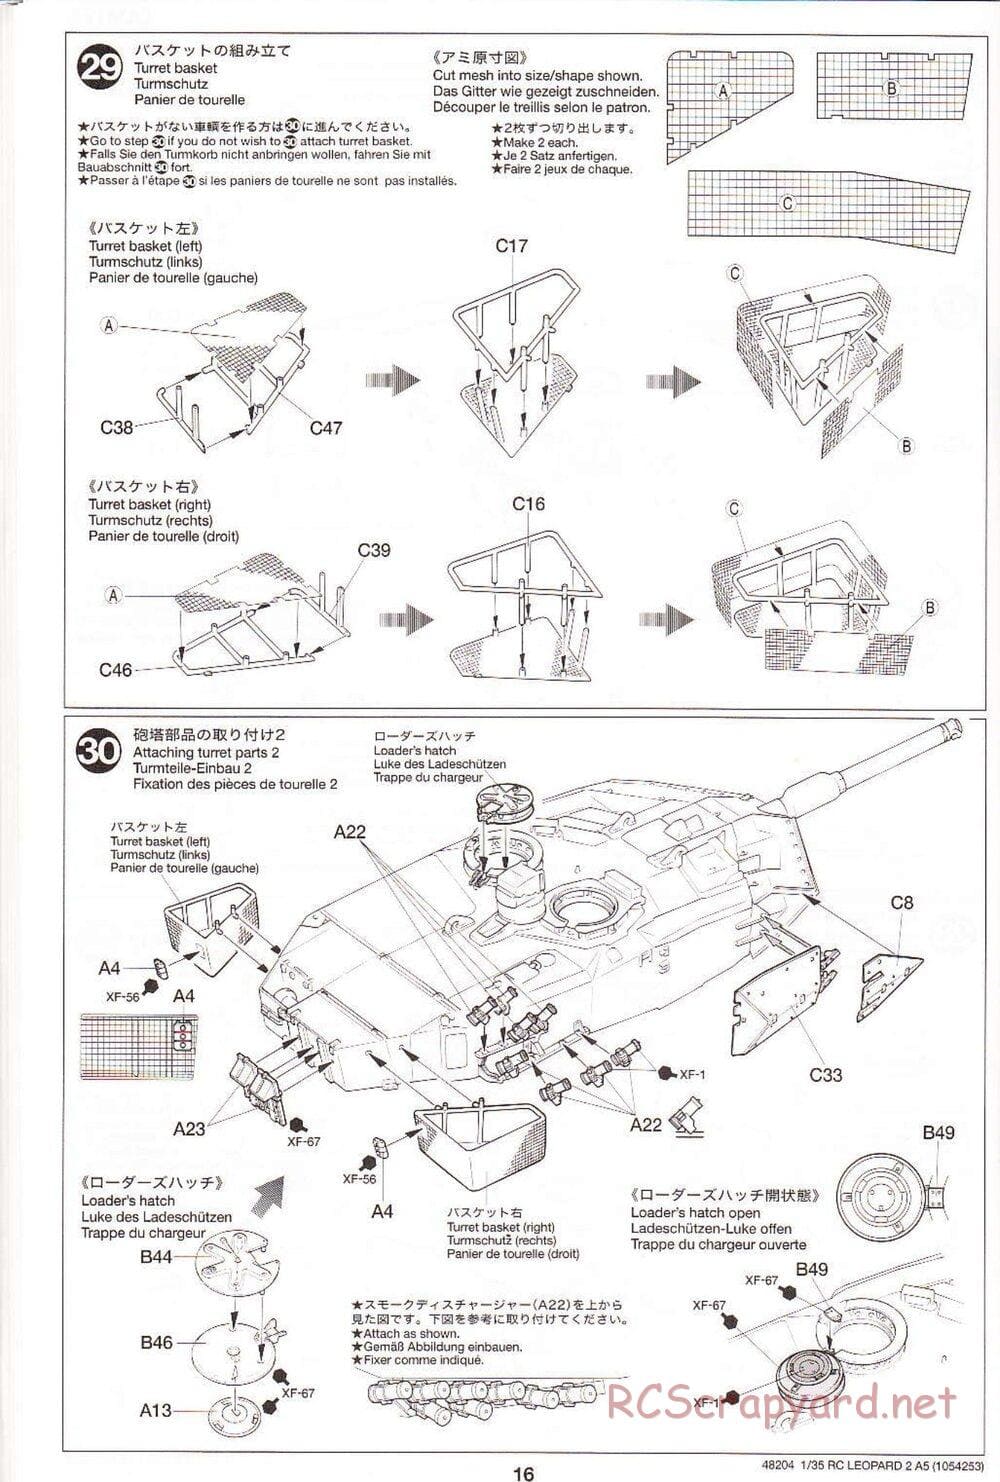 Tamiya - Leopard 2 A5 Main Battle Tank - 1/35 Scale Chassis - Manual - Page 16